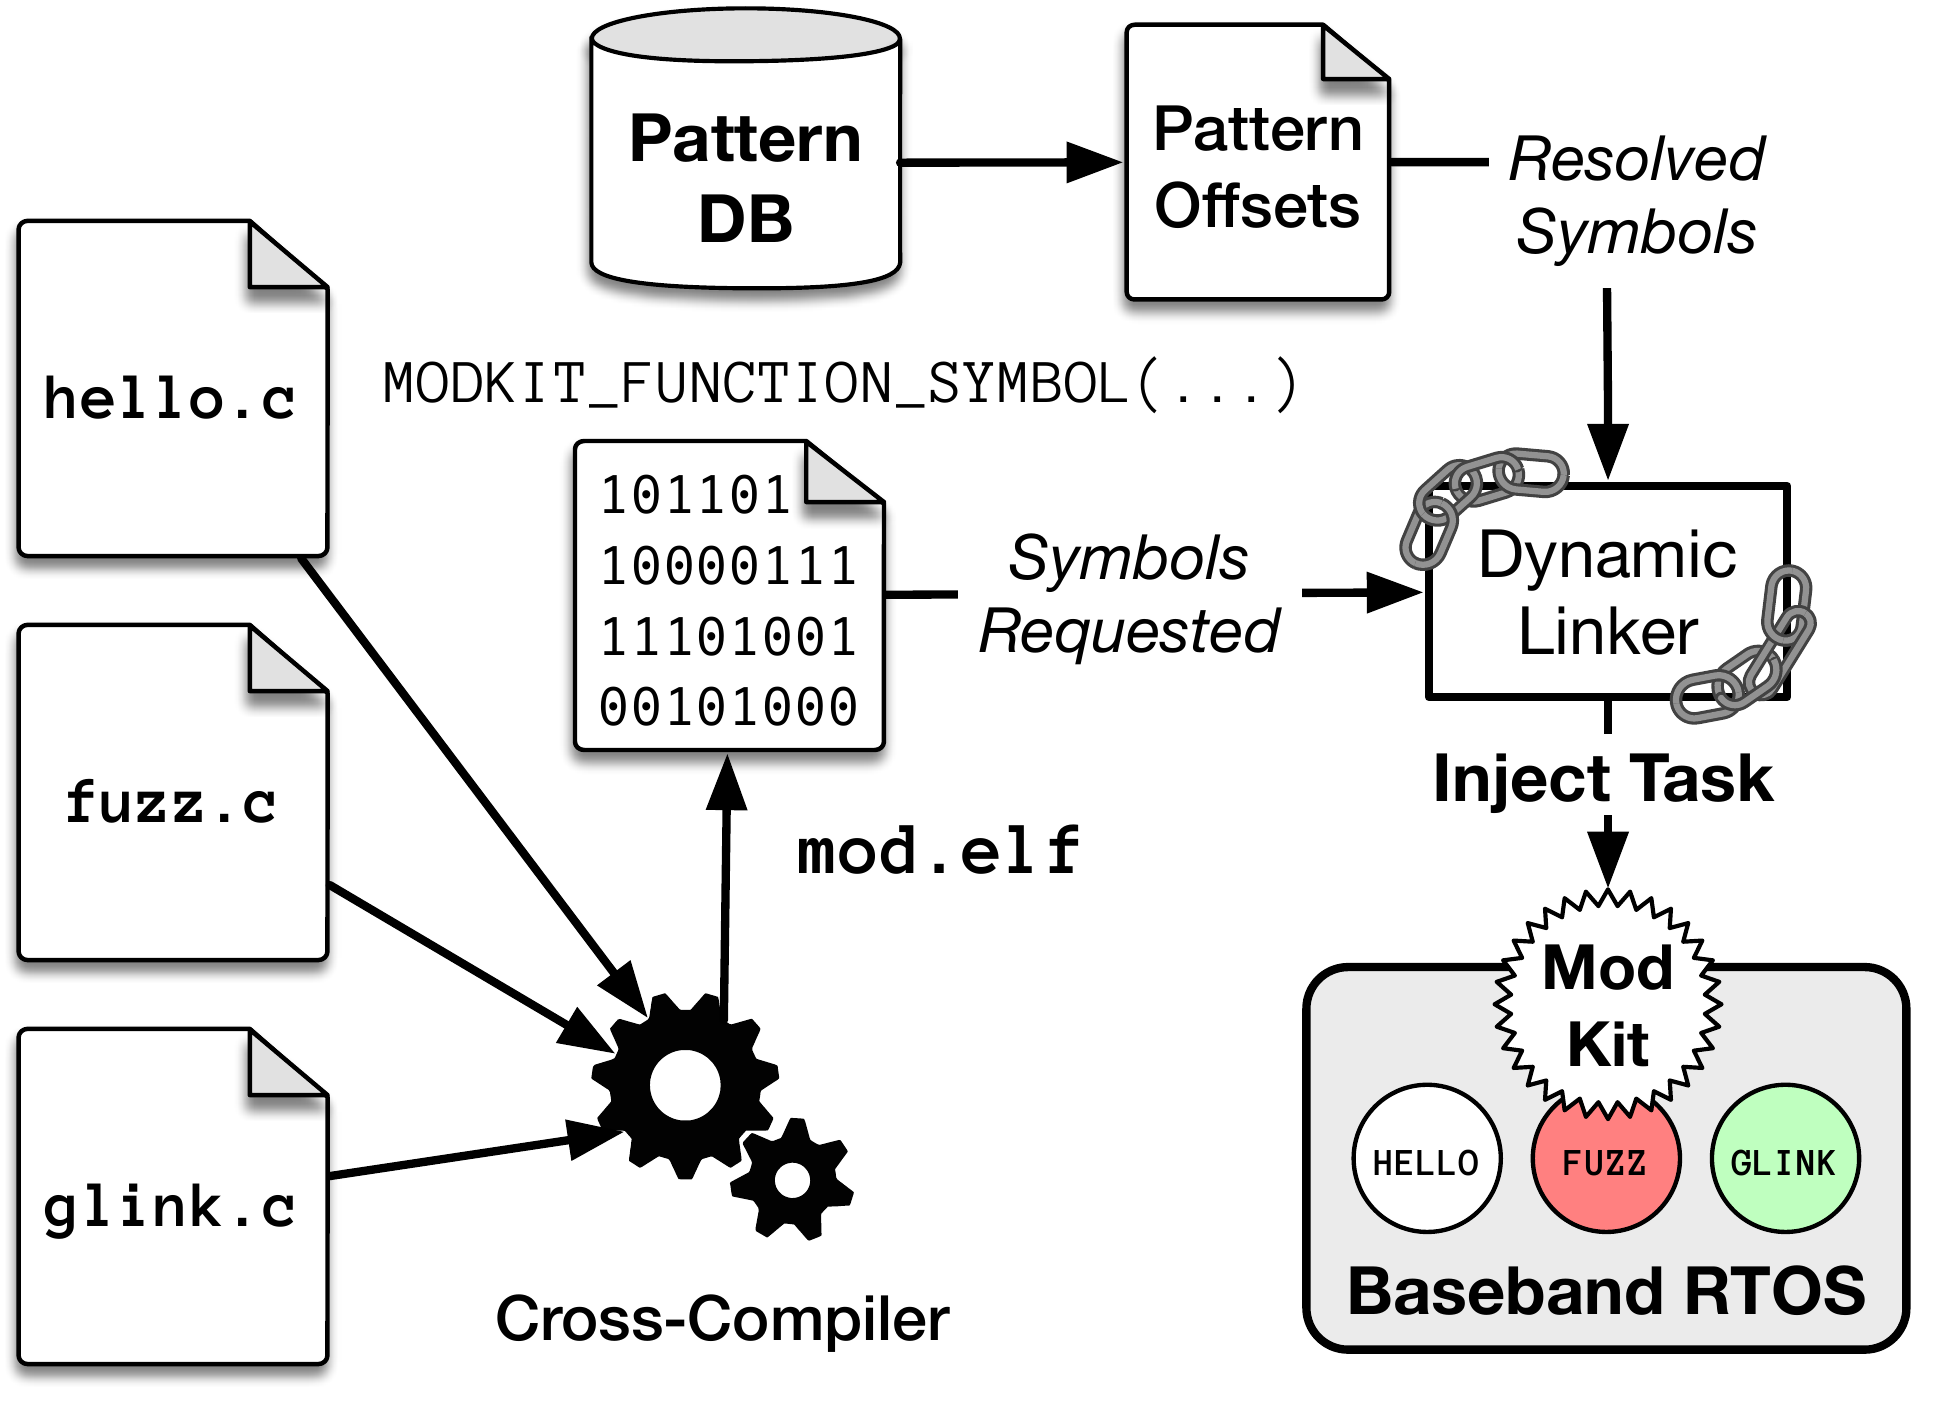 The overall design of FirmWire's portable ModKit.
Modules are written in C and compiled using a baseband-specific cross-compiler matching the CPU architecture. These
modules (ELF files) are dynamically linked against the PatternDB for portability between firmware and injected into the
baseband RTOS to modify its functionality.
